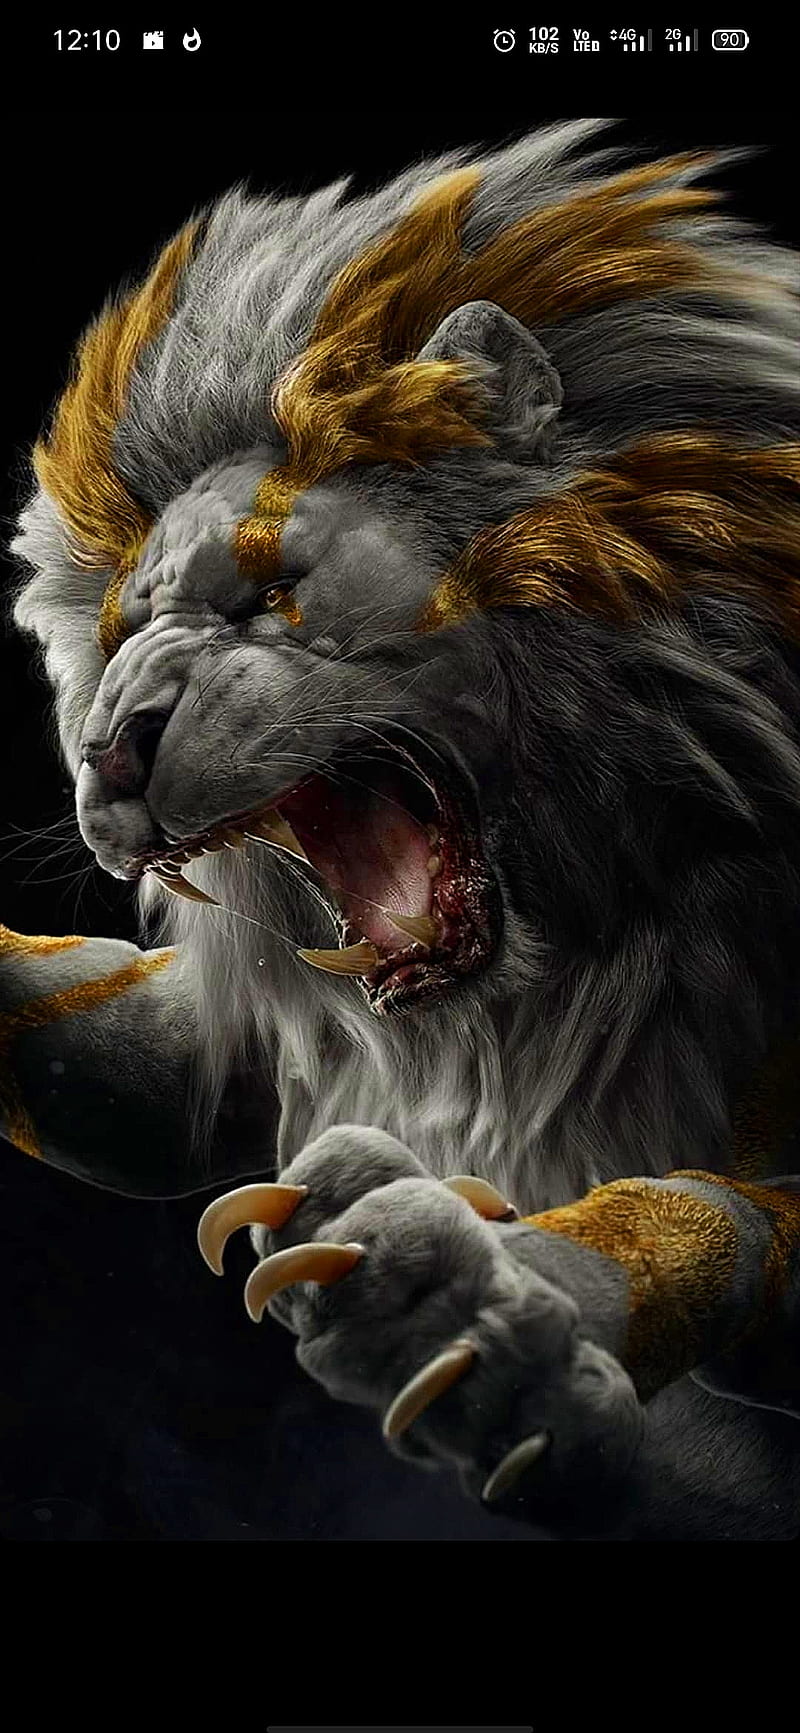 HD wallpaper 3D Lion Characters white tigers king  Wallpaper Flare